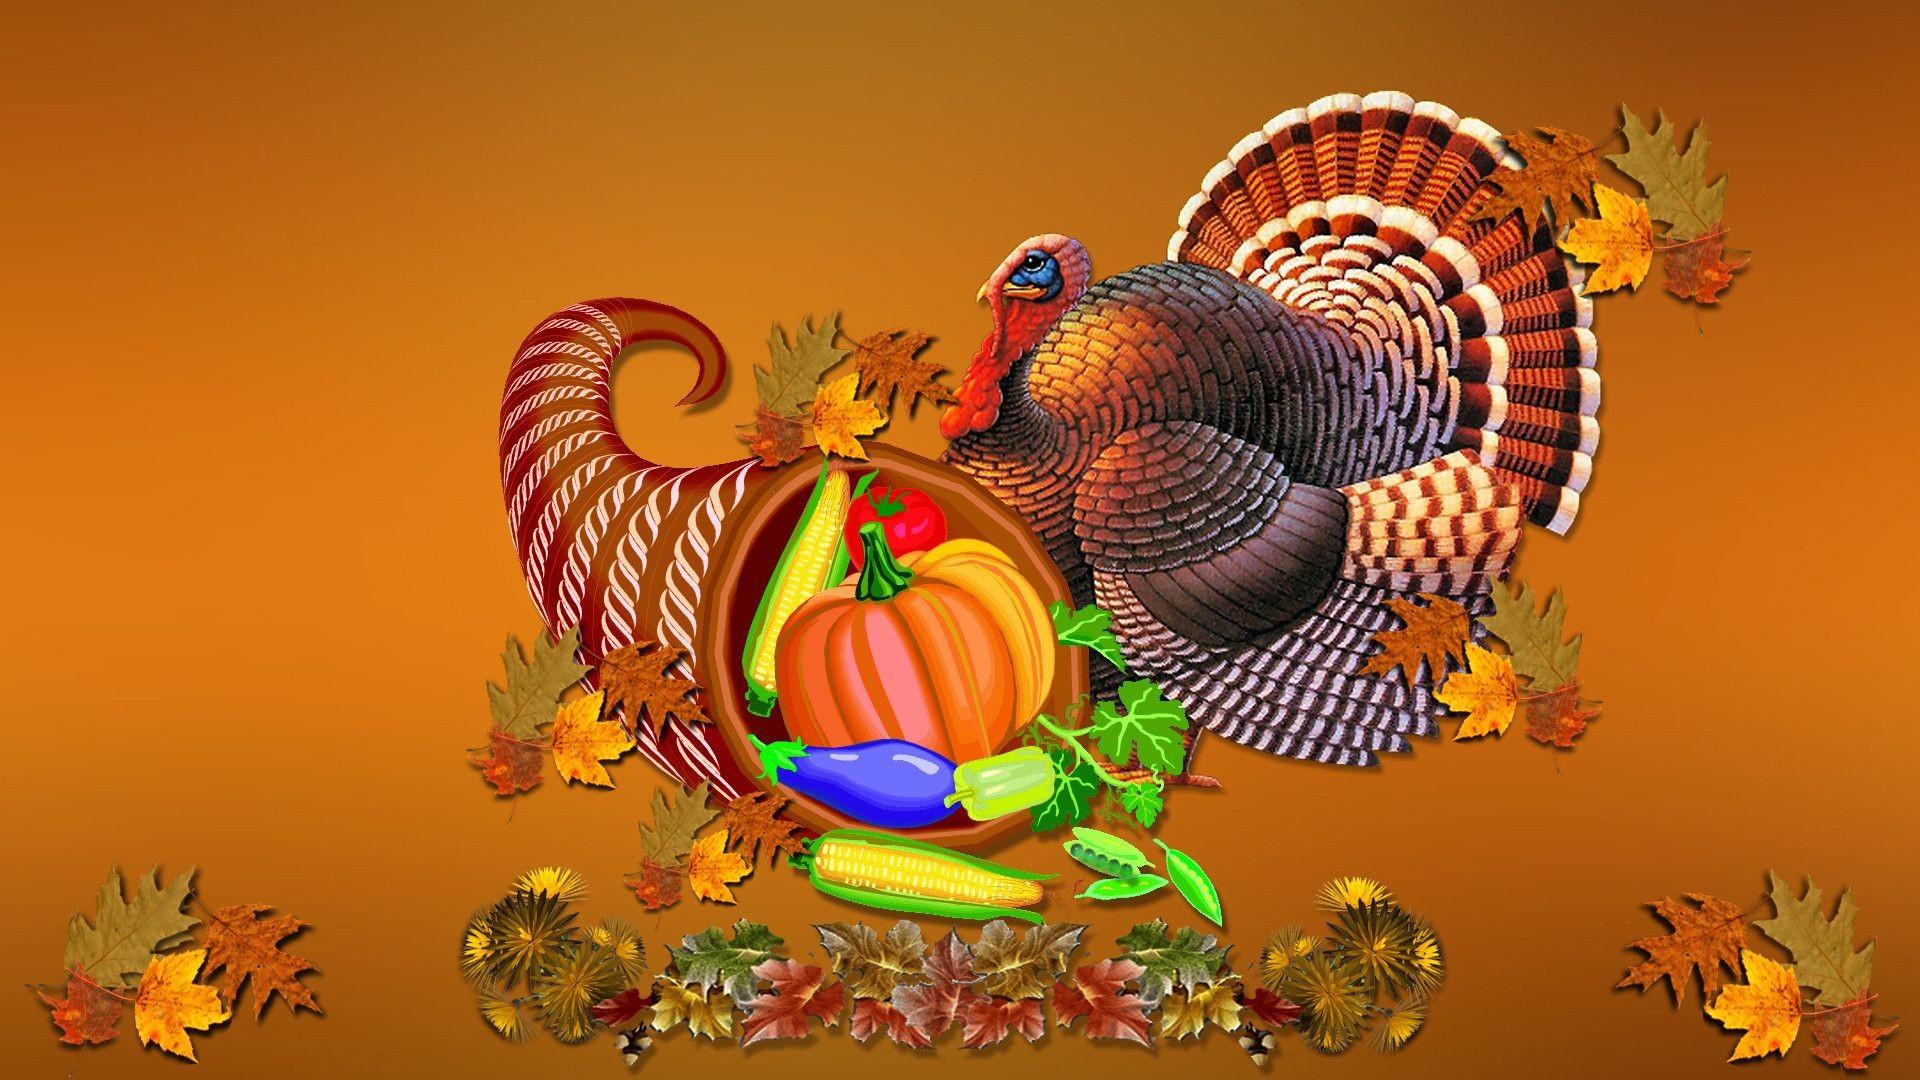 Cute Thanksgiving Wallpaper background picture